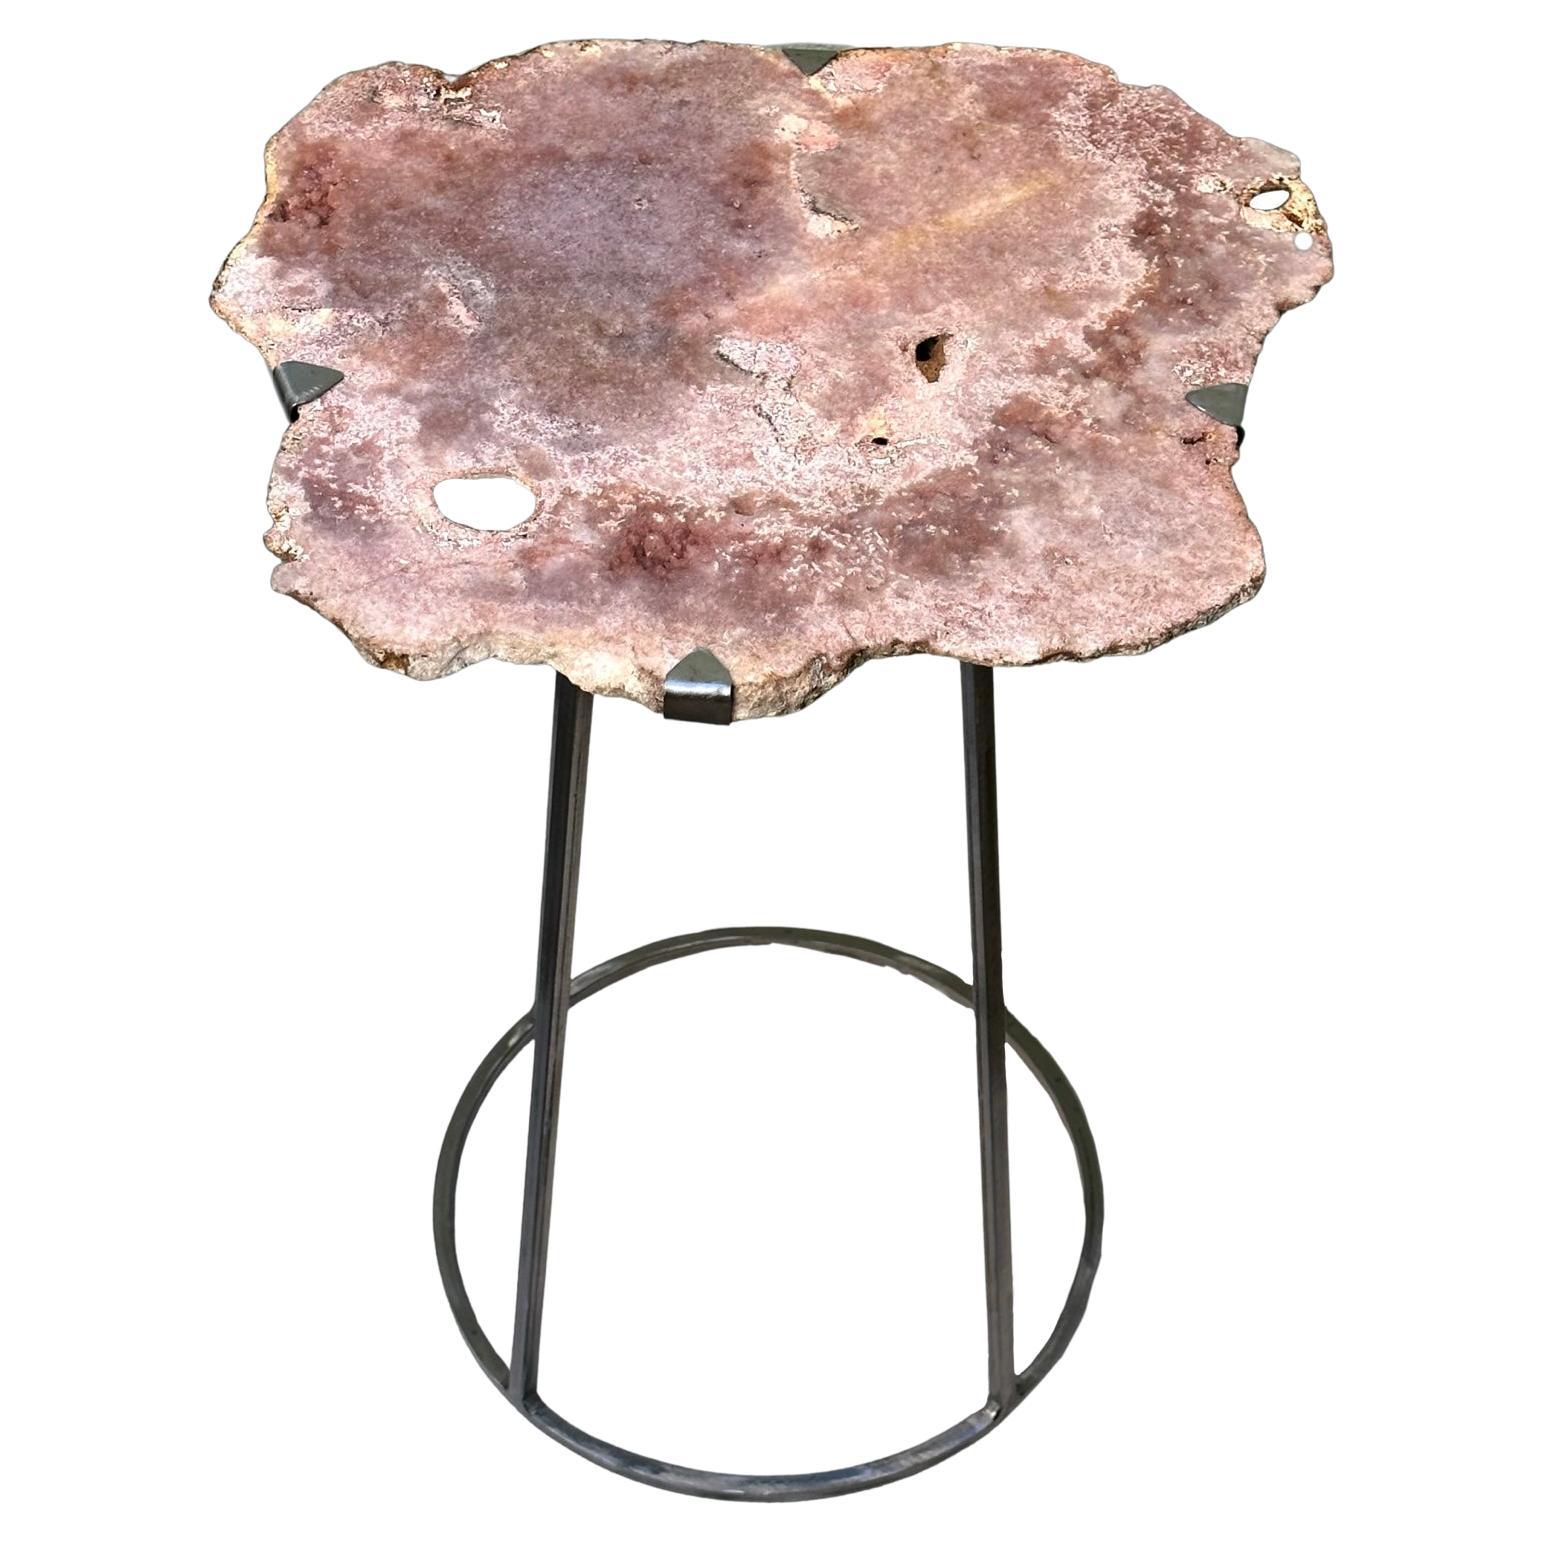 Table forged in natural iron with varnish,
Natural Rose Amethyst top
single table due to the naturalness of the stone.